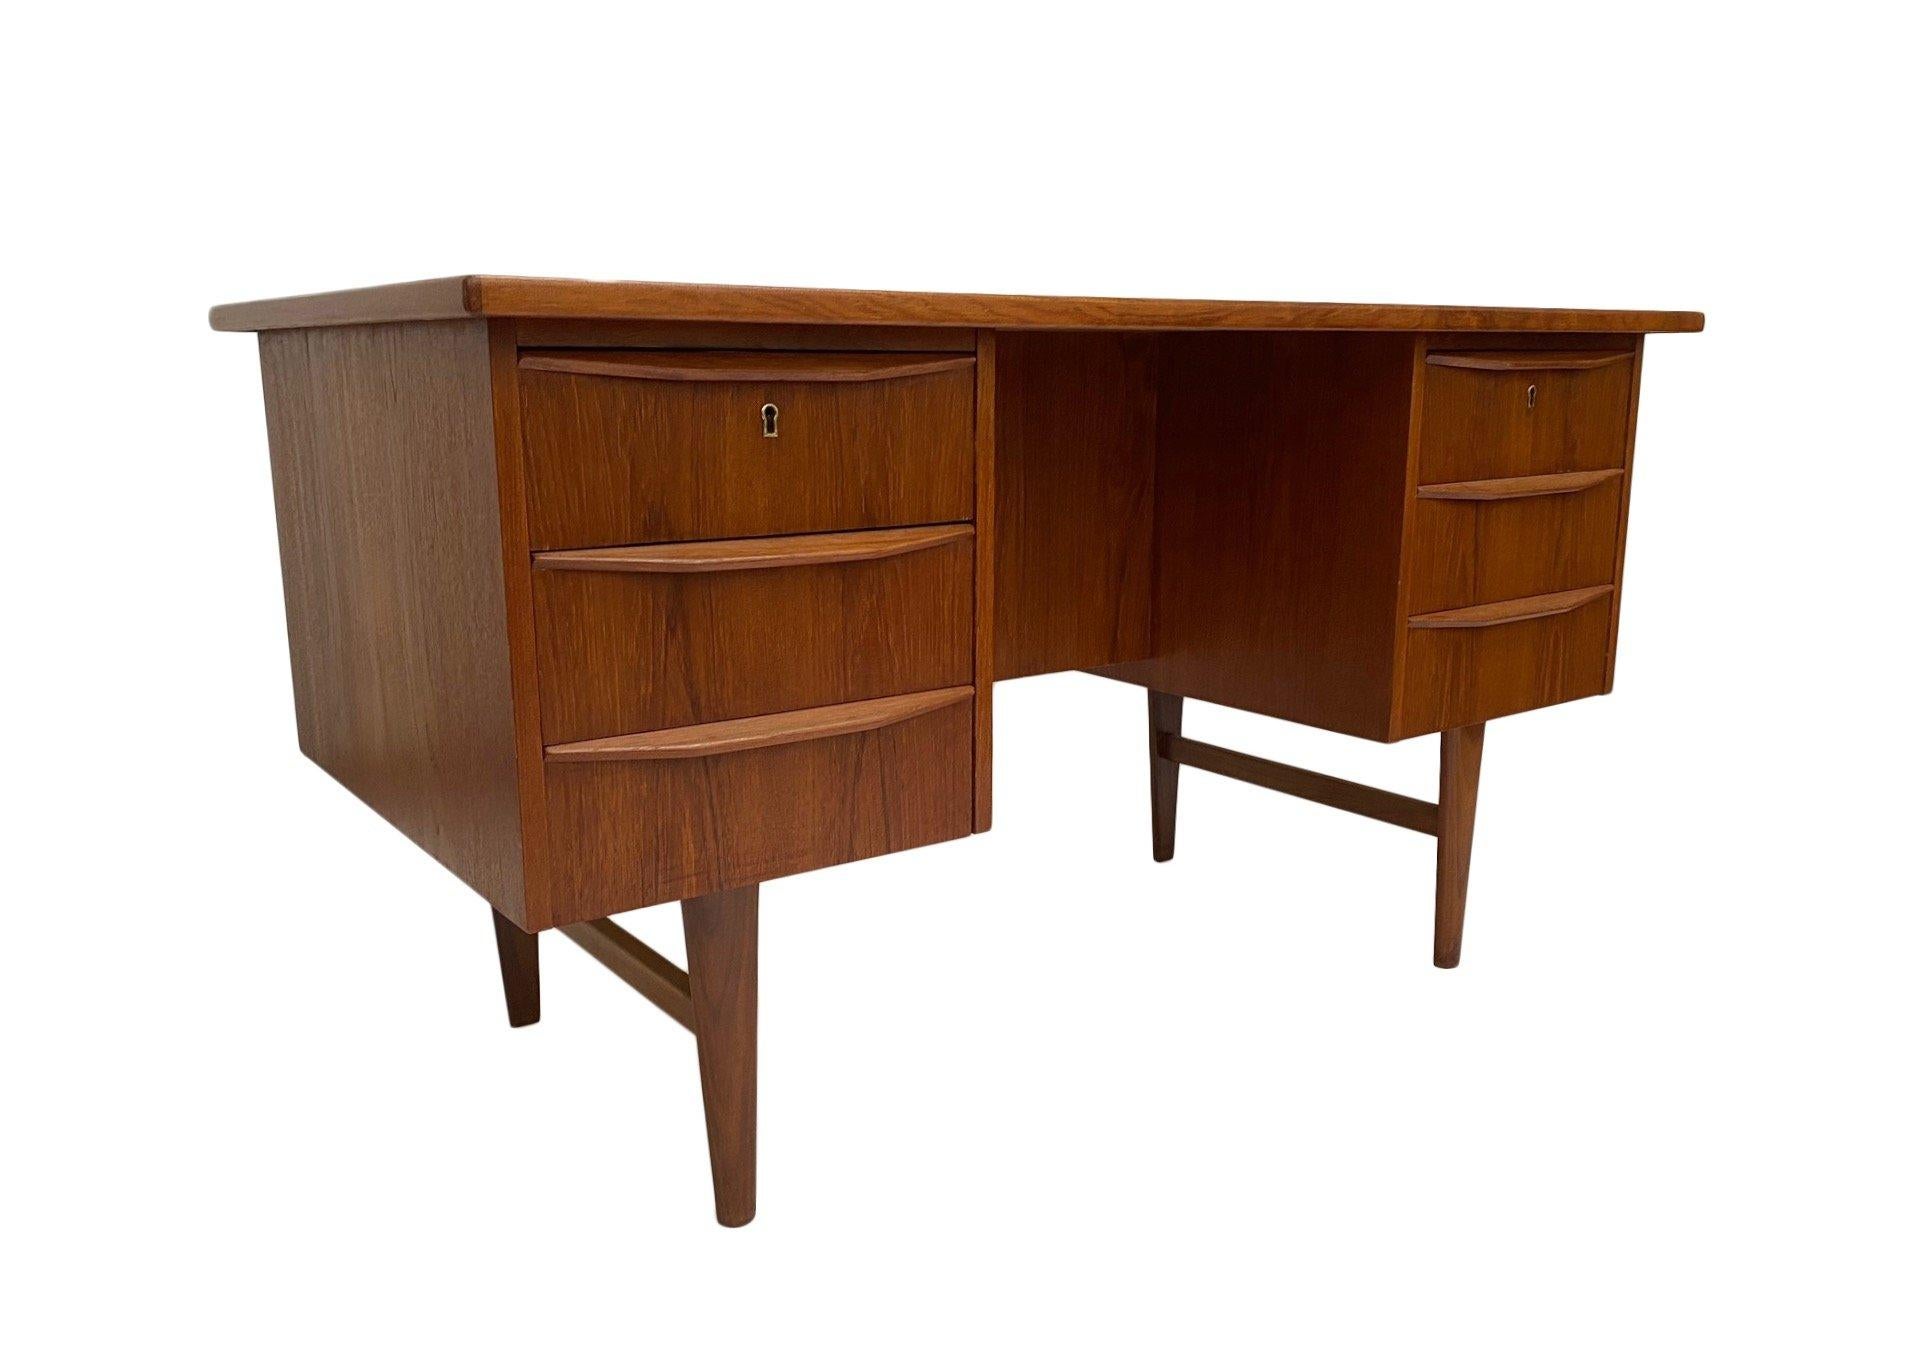 A beautiful Danish teak pedestal writing desk with scalloped handles, this would make a stylish addition to any work area. A striking piece of classically designed Scandinavian furniture.

The desk has two banks of three drawers, all are in good